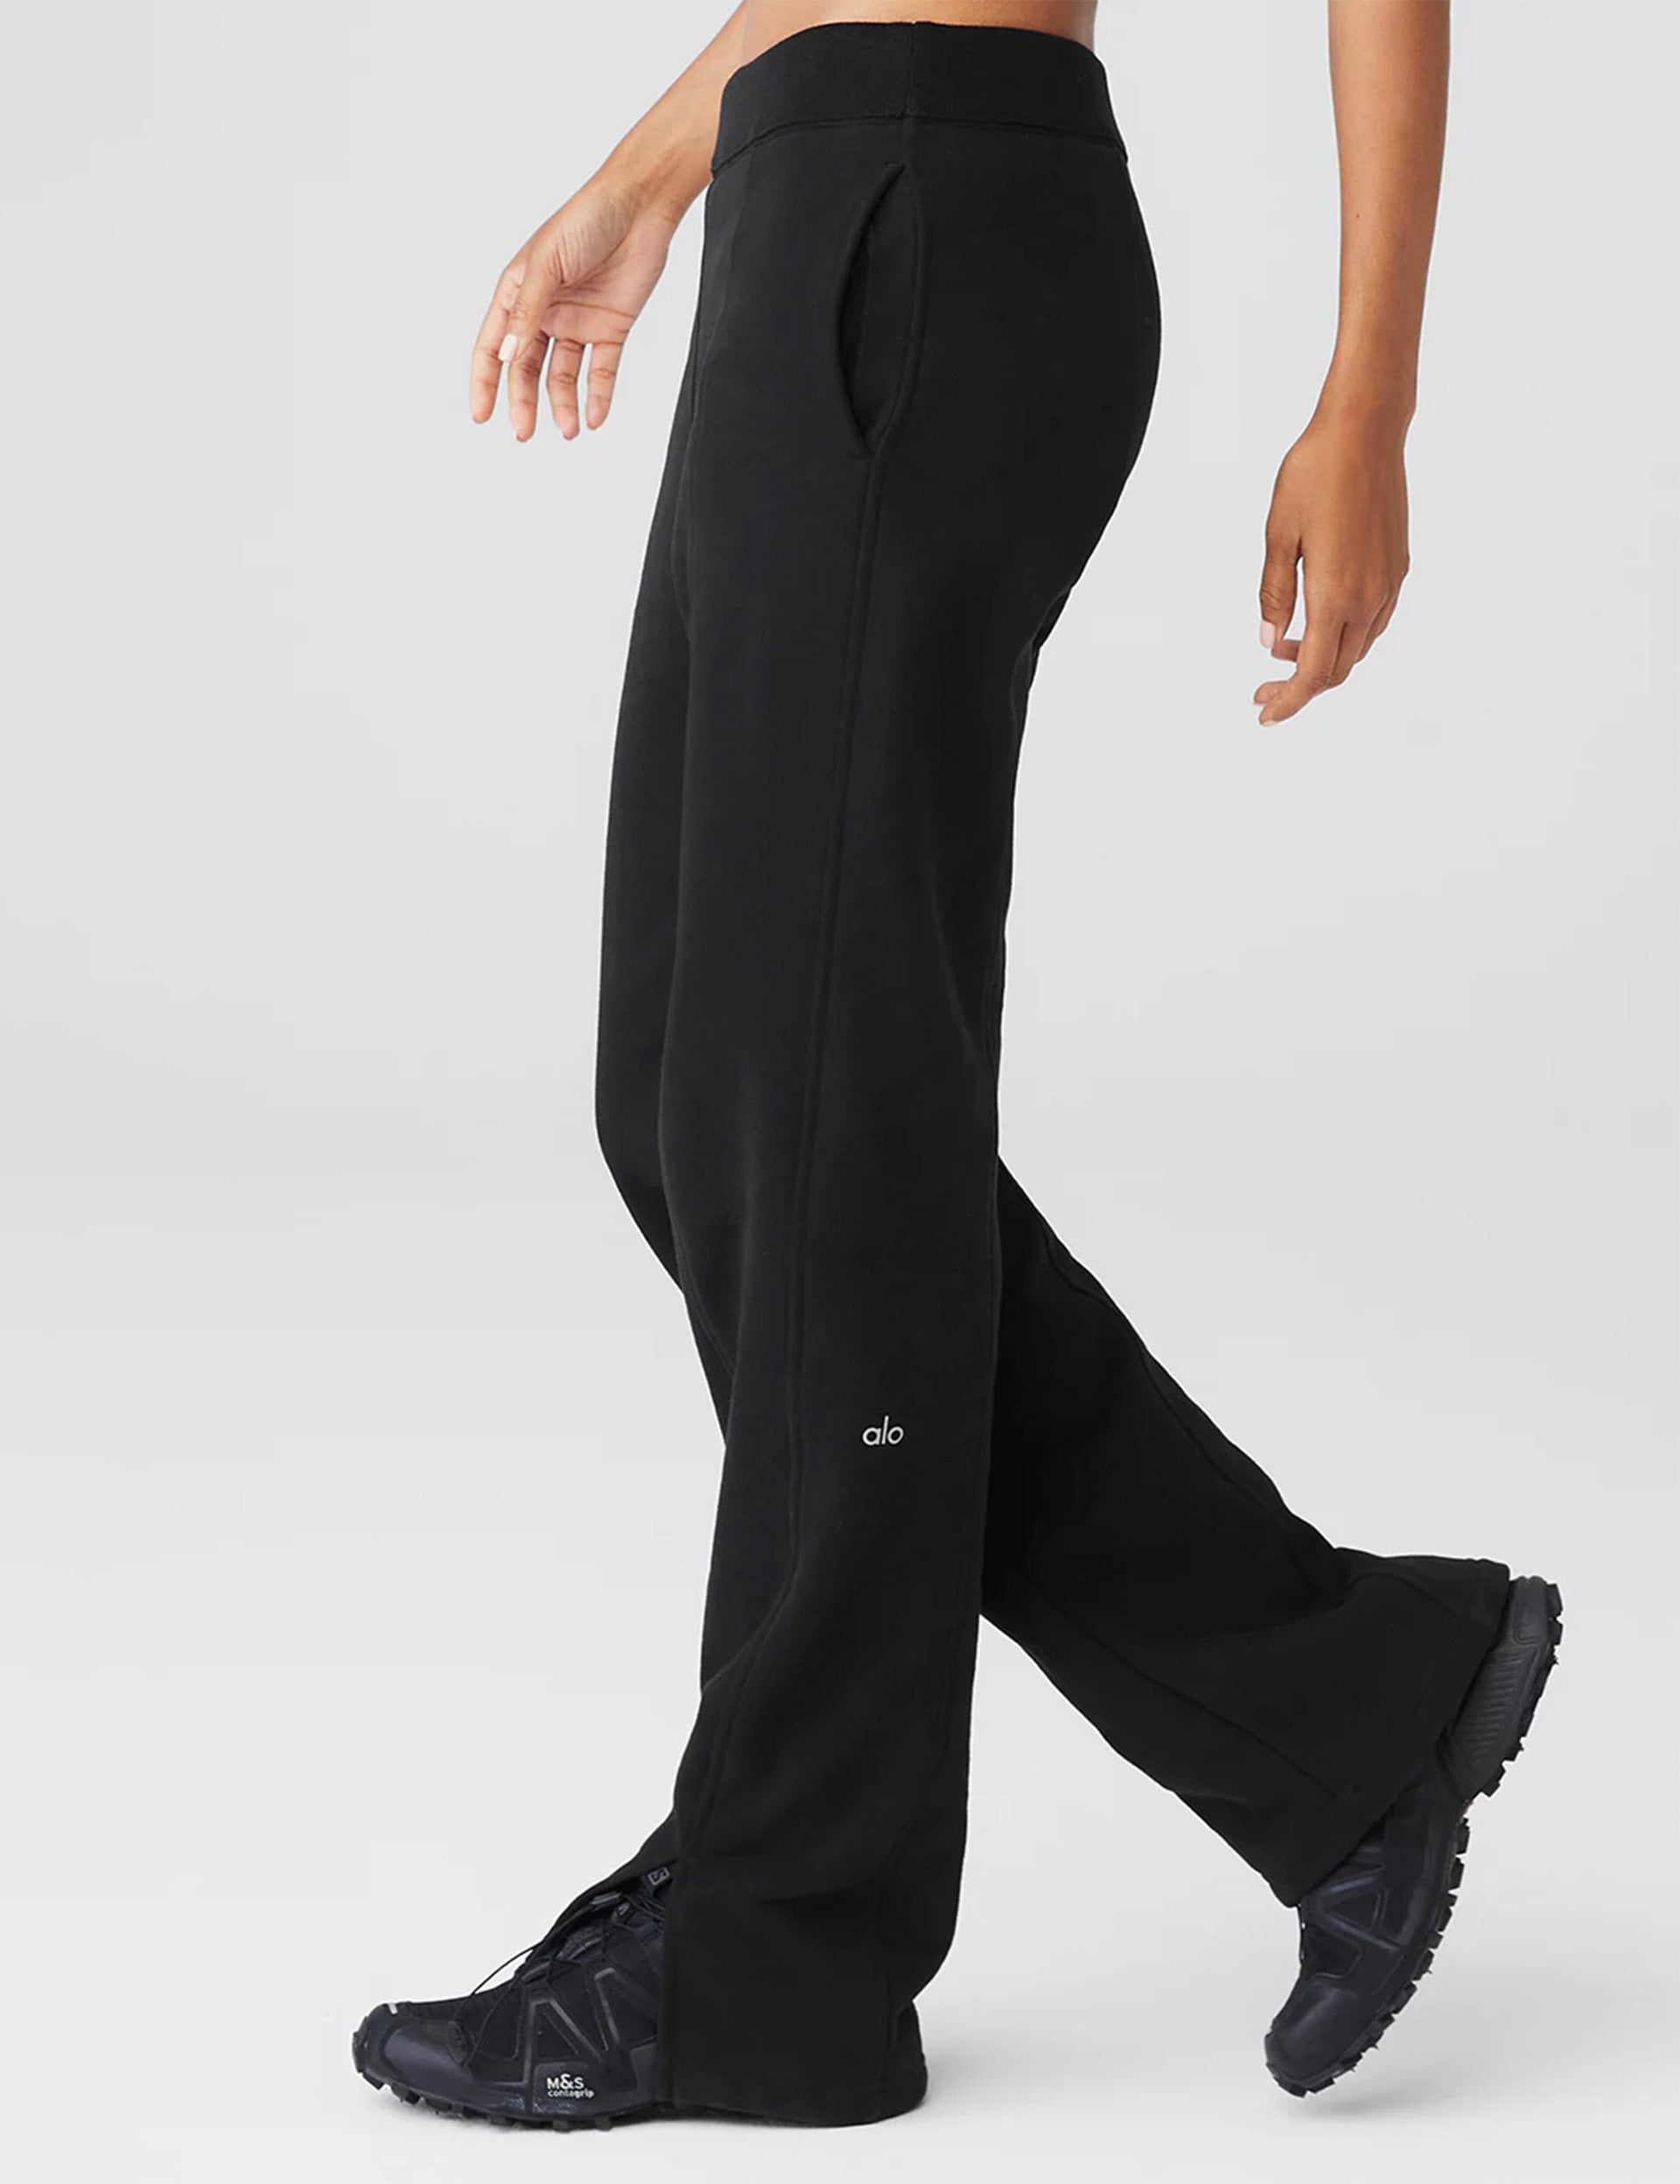 Like New no tags (never used) Alo Yoga Accolade Sweatpants in Black Size XS  - Athletic apparel